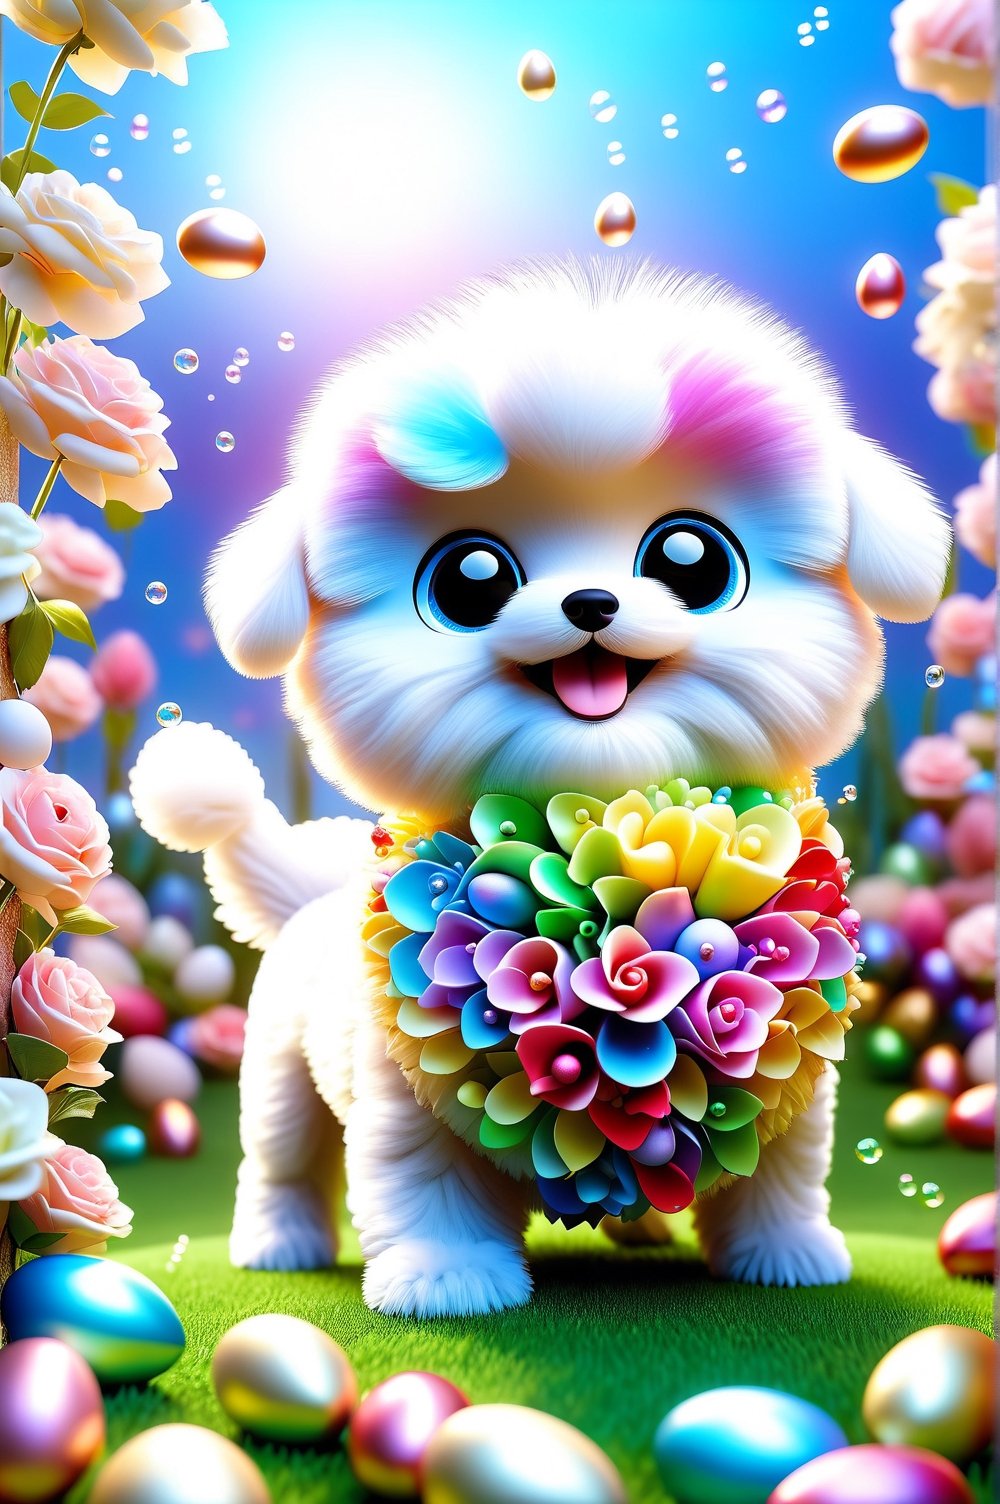 Charming and happy little puppy [Bichon Frizé] Chibi, nestled among roses, framed by a lush green lawn dotted with Easter eggs, against a backdrop of blue sky and rainbow arches with floating soap bubbles, in a pose on all fours, Photographed by Miki Asai with macro lens precision, trending on ArtStation with Greg Rutkowski's detailed fantasy style in 9k resolution, sharp F 1.5 focus aperture, intricate details, studio photography setting, ultra high